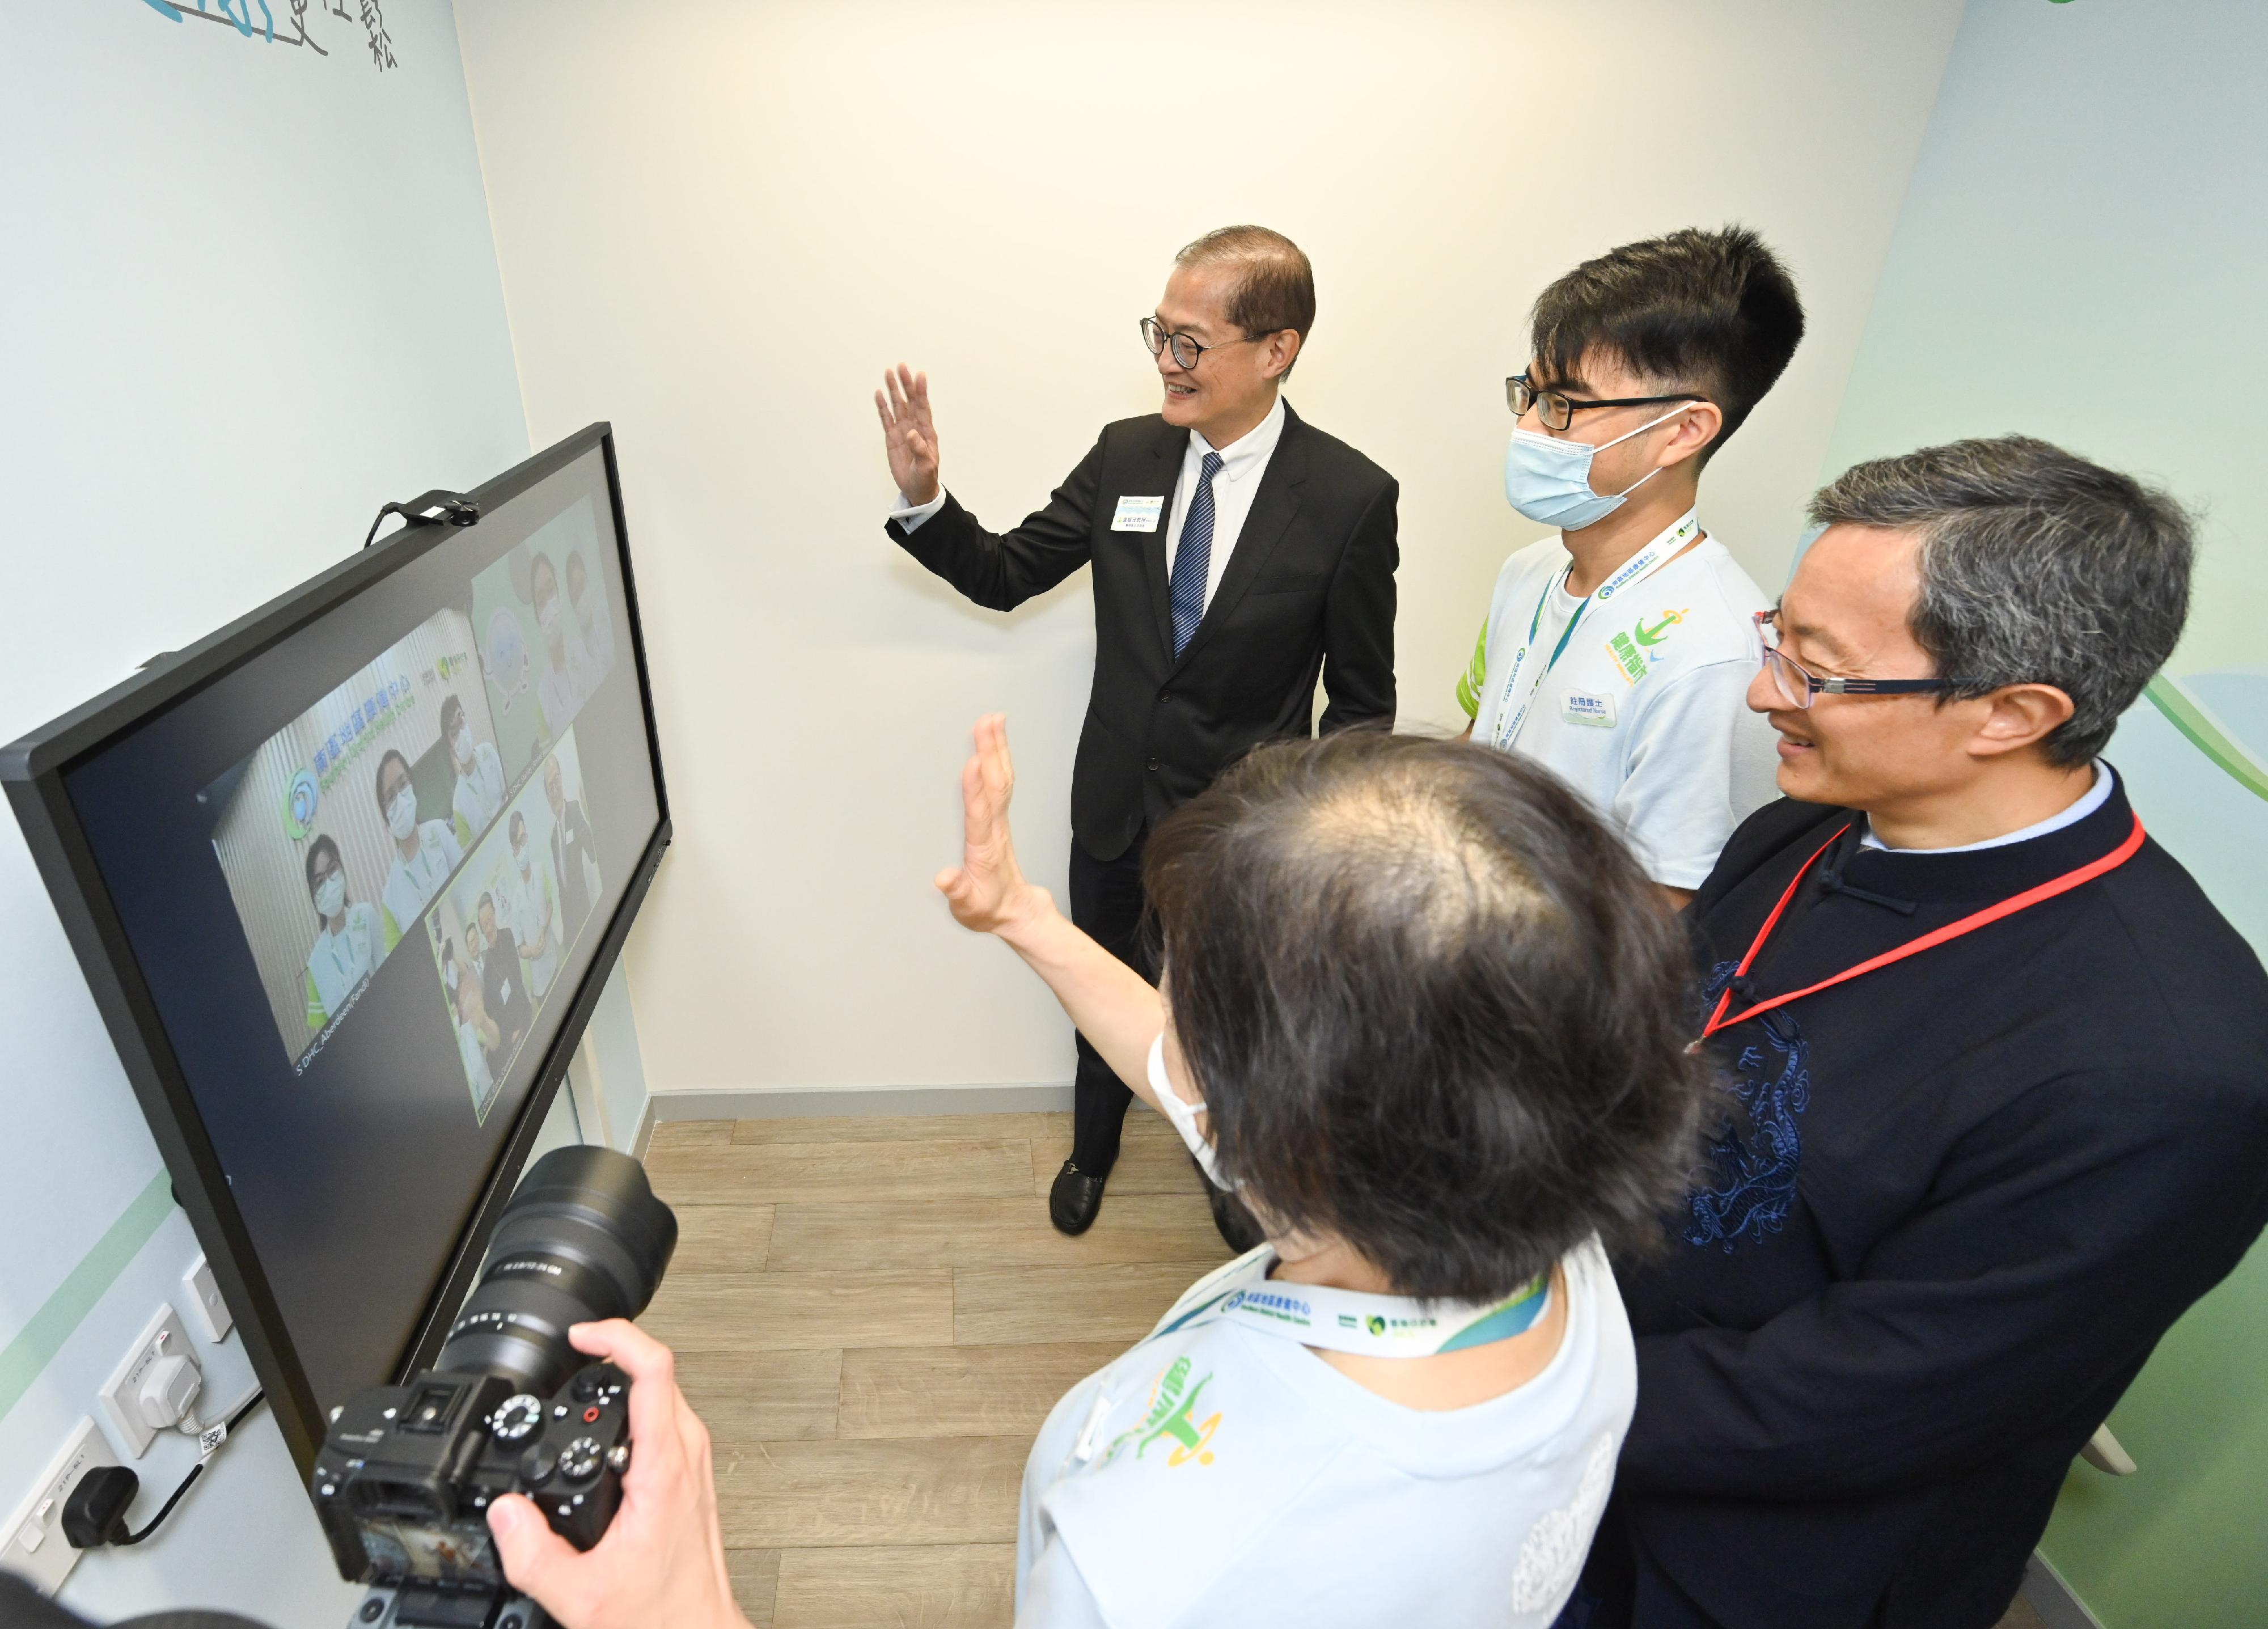 The Secretary for Health, Professor Lo Chung-mau (left), gains a better understanding on how the Southern District Health Centre (DHC) utilises its telemedicine services to serve more DHC members with prompt and appropriate medical assistance through a demonstration by staff members this afternoon (July 26).